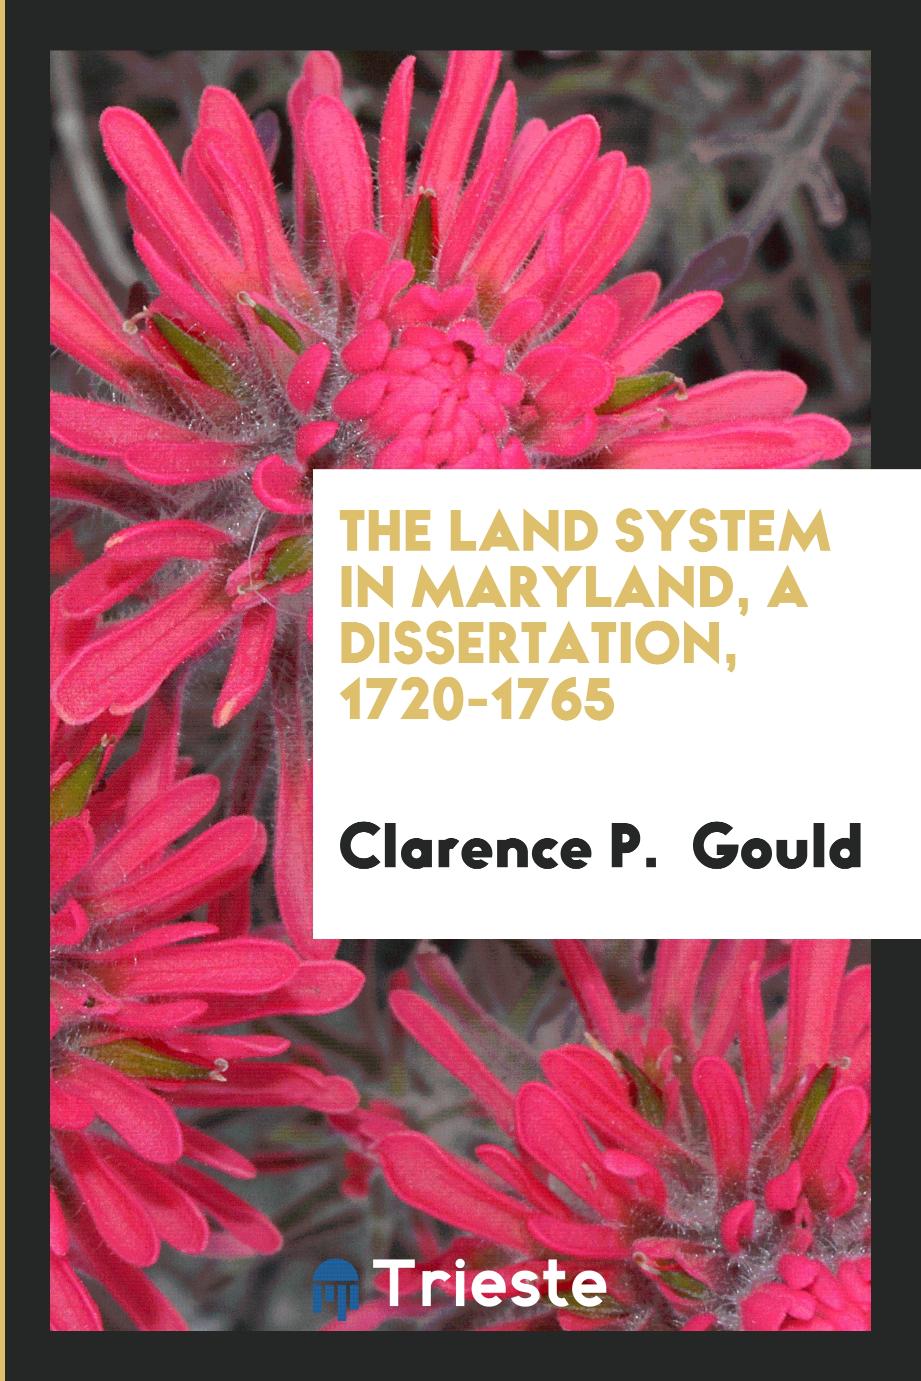 The Land System in Maryland, a Dissertation, 1720-1765